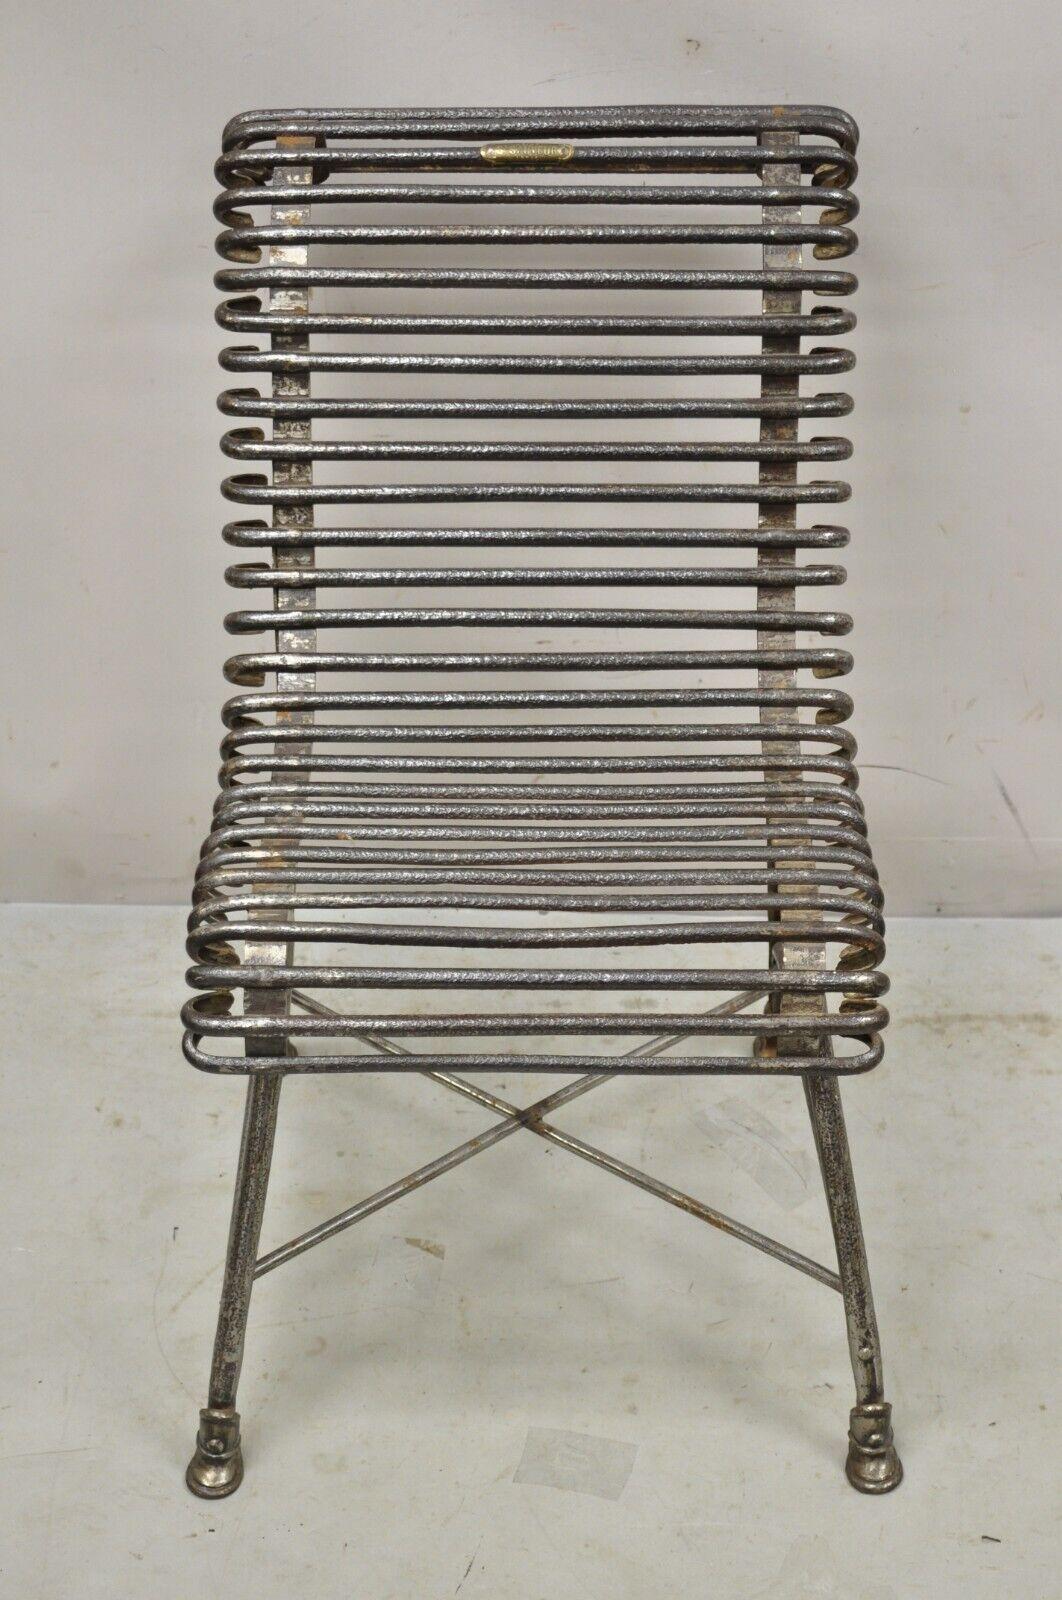 Antique French Wrought Cast Iron Spine Sauveur Arras Scrolling Garden Side Chair. Item features wrought and cast iron frame, unique 